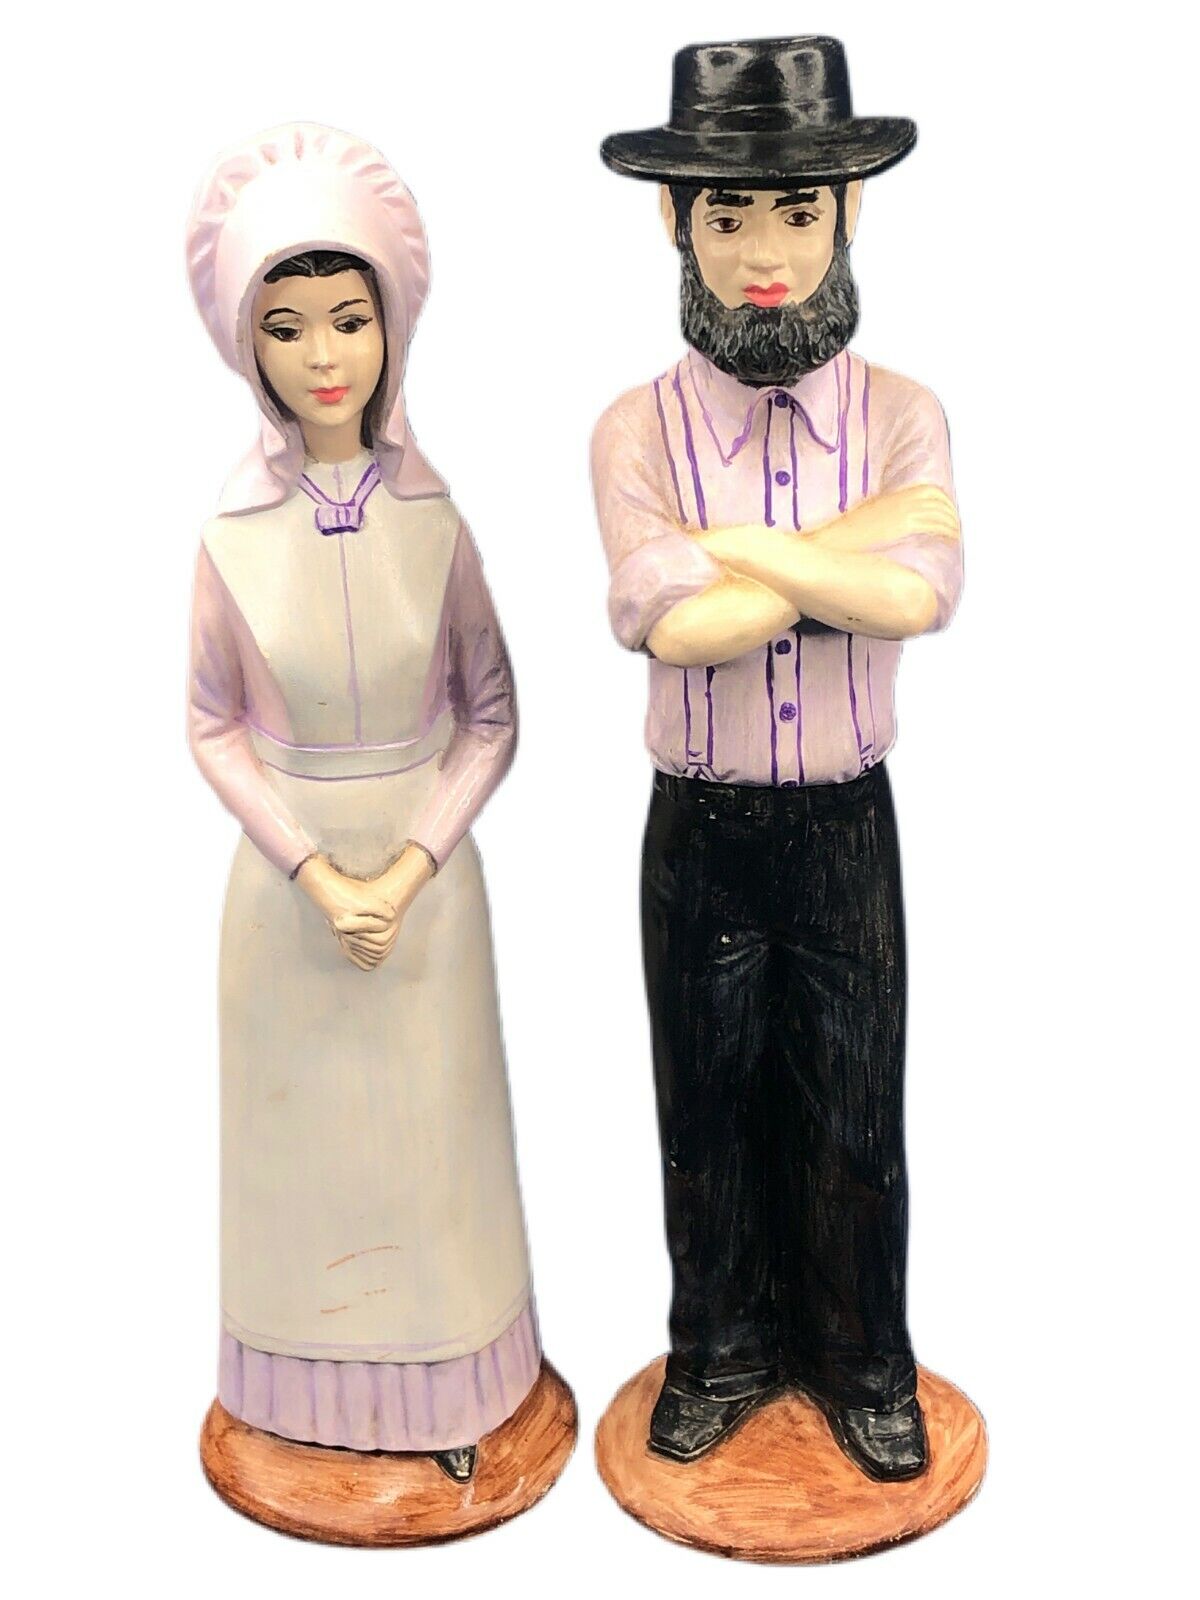 Vtg Byron Molds Amish Couple Porcelain Ceramic Statues Figurines 12.5” Tall 1974